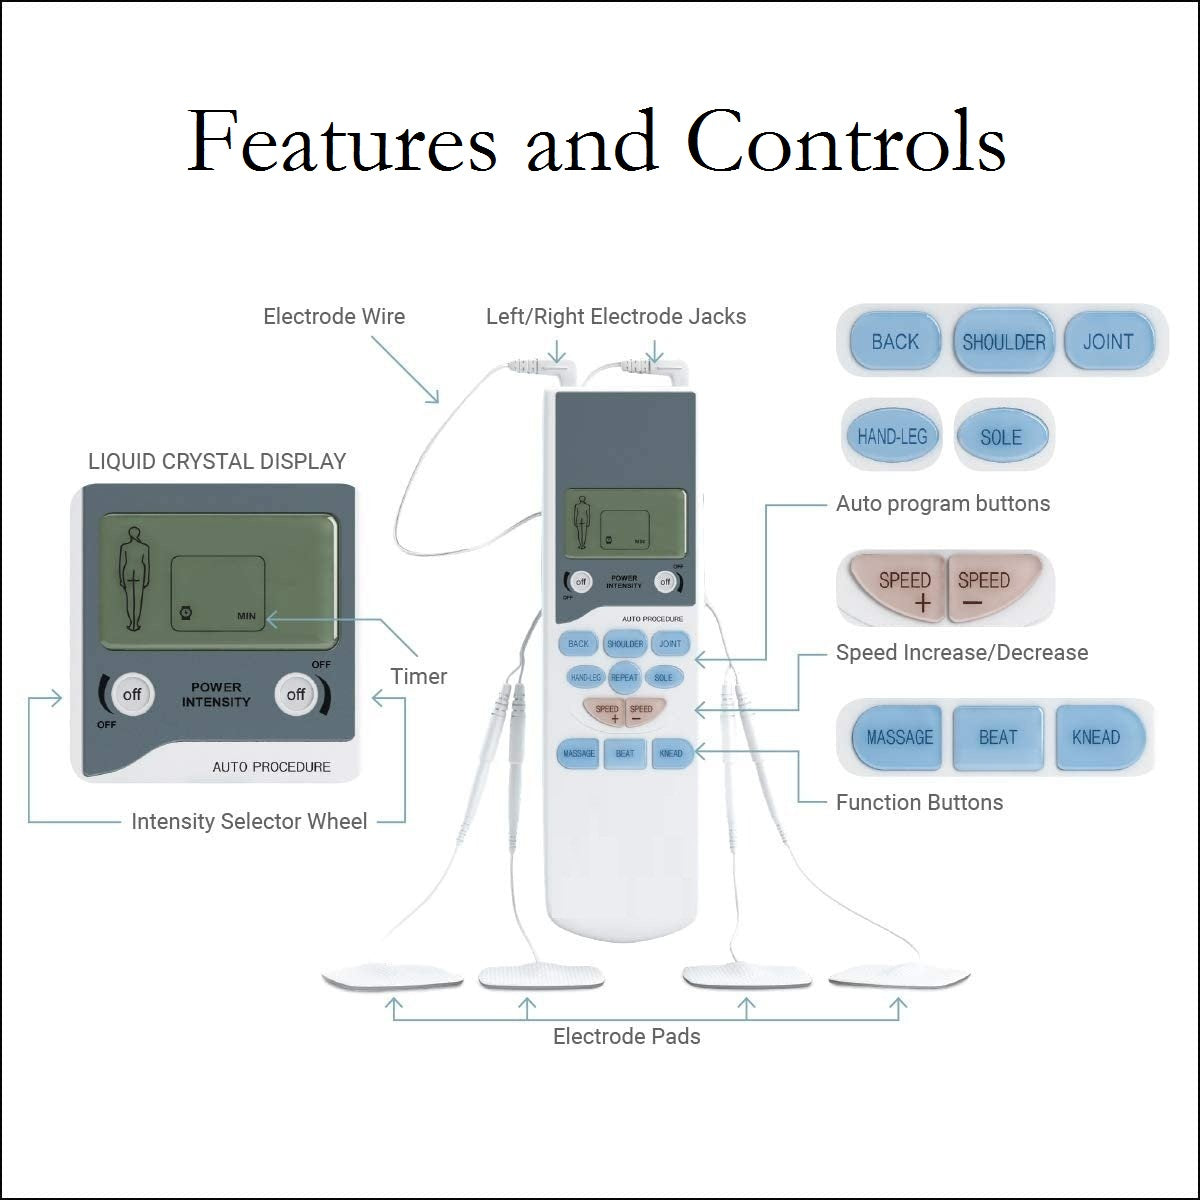 Features and Controls of 2 Channel 9 Mode Power Box